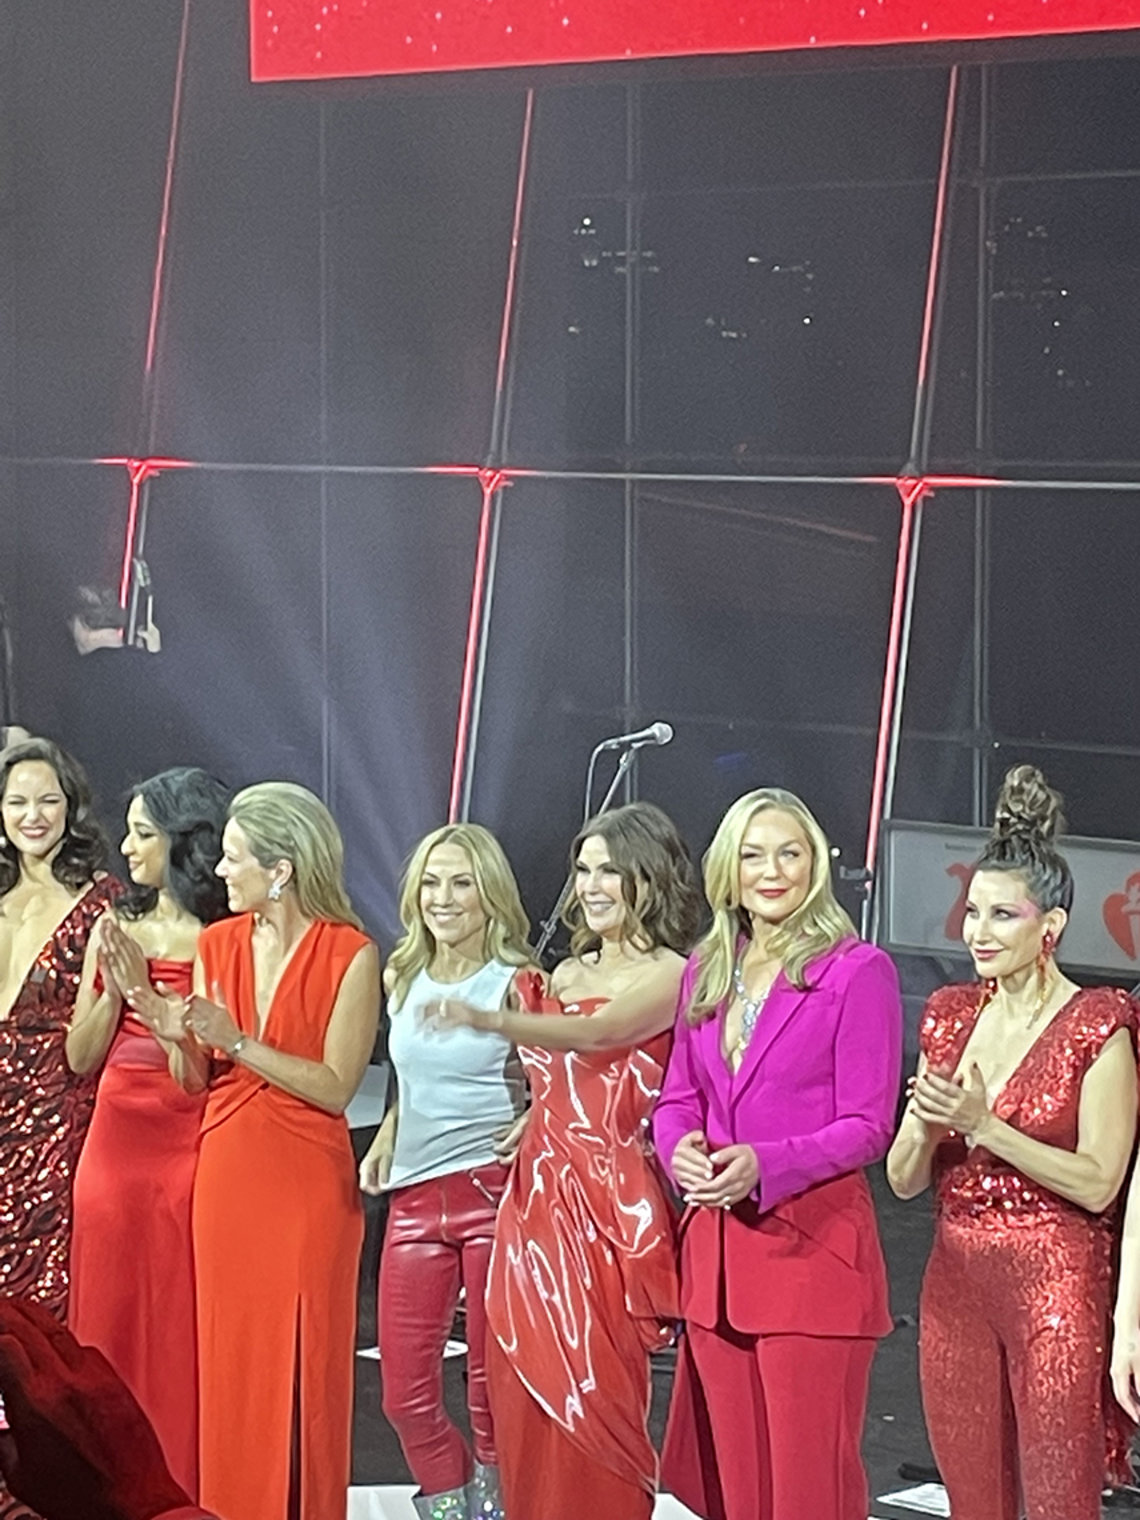 A group of women in red and pink attire stand on stage.